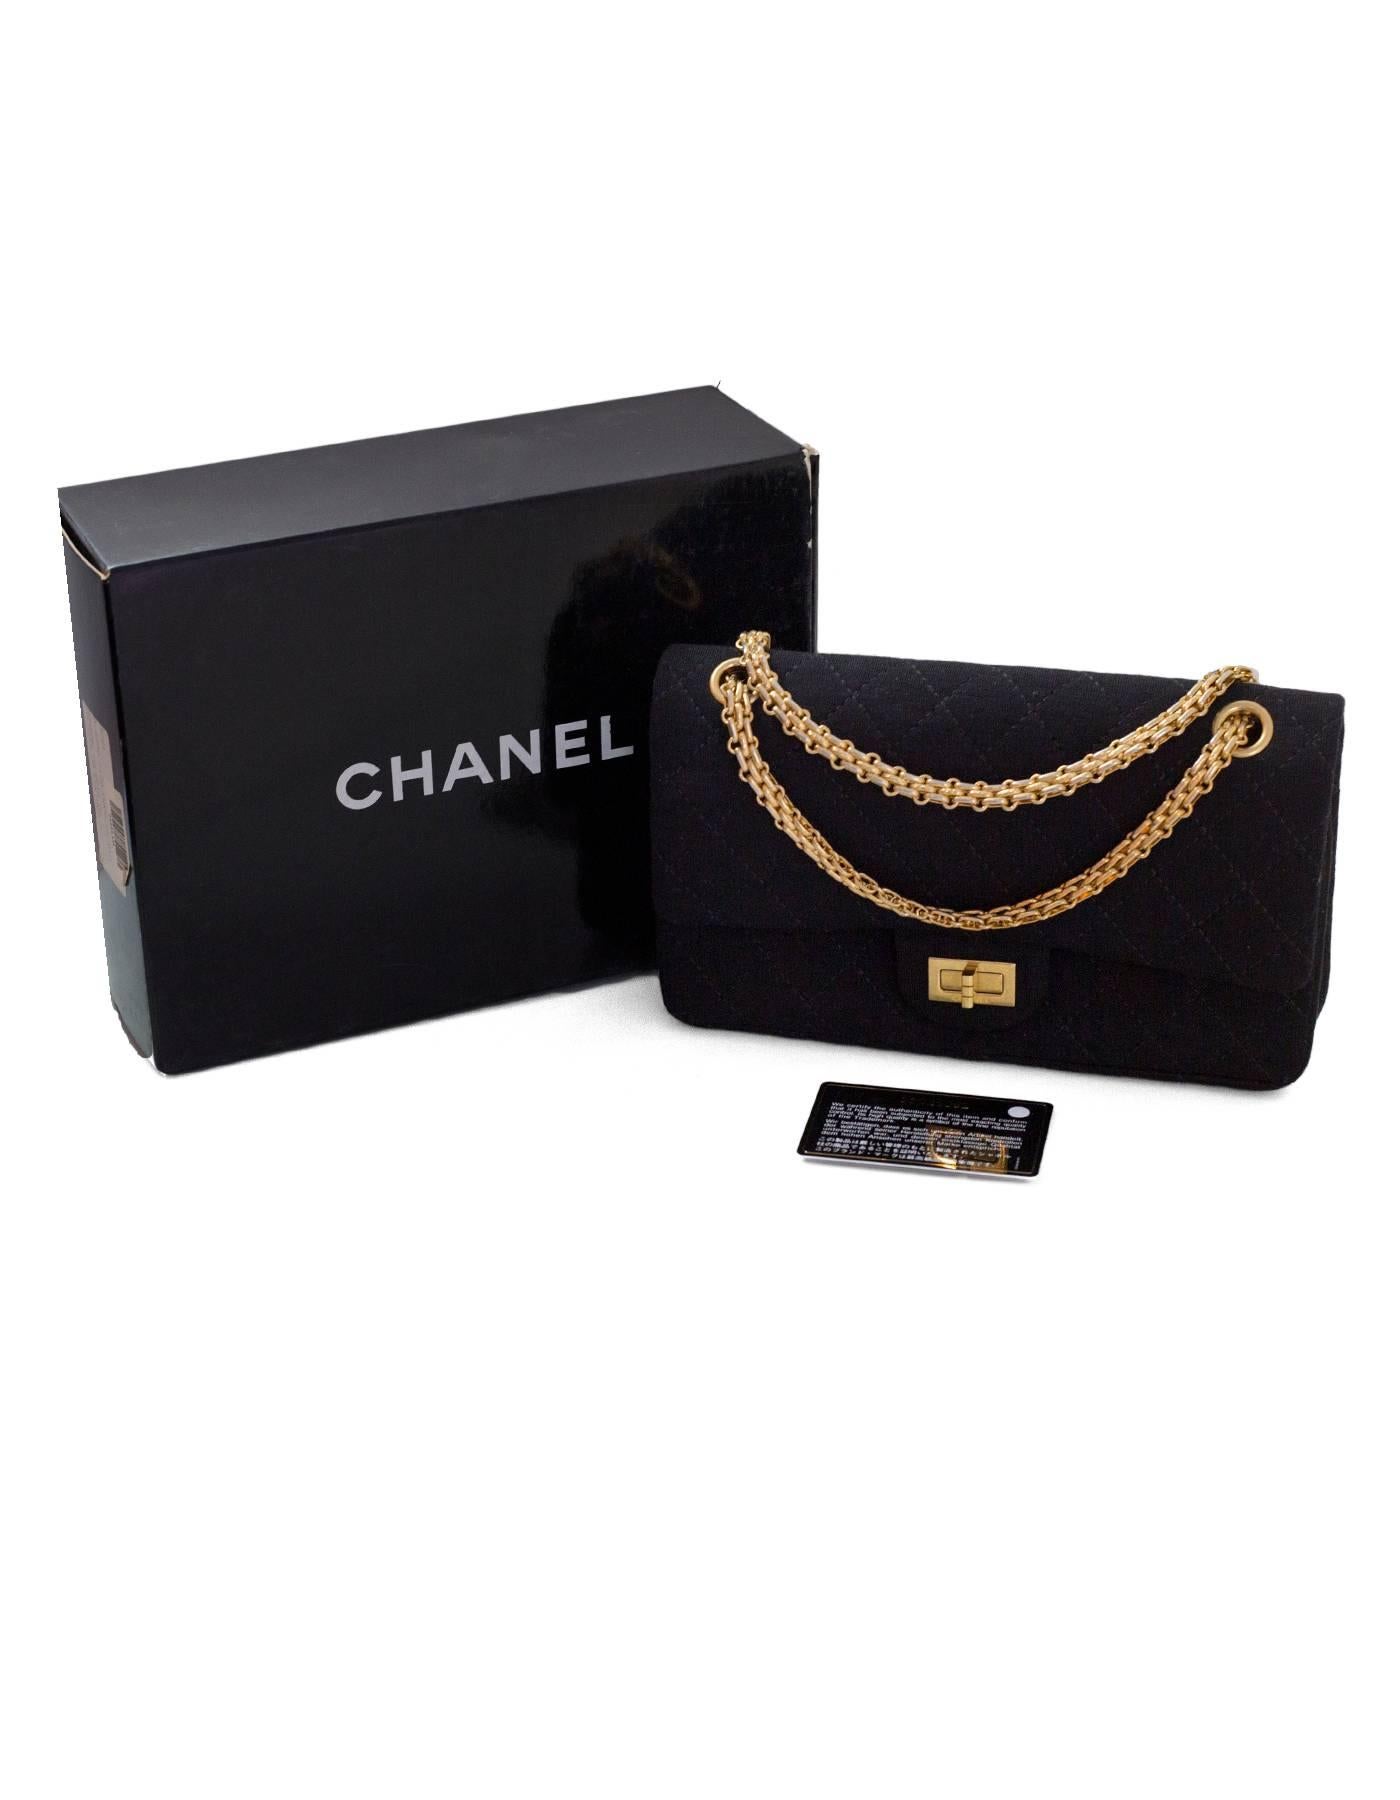 Chanel Black Jersey Reissue 2.55 Reissue 225 Double Flap Bag with Box 6